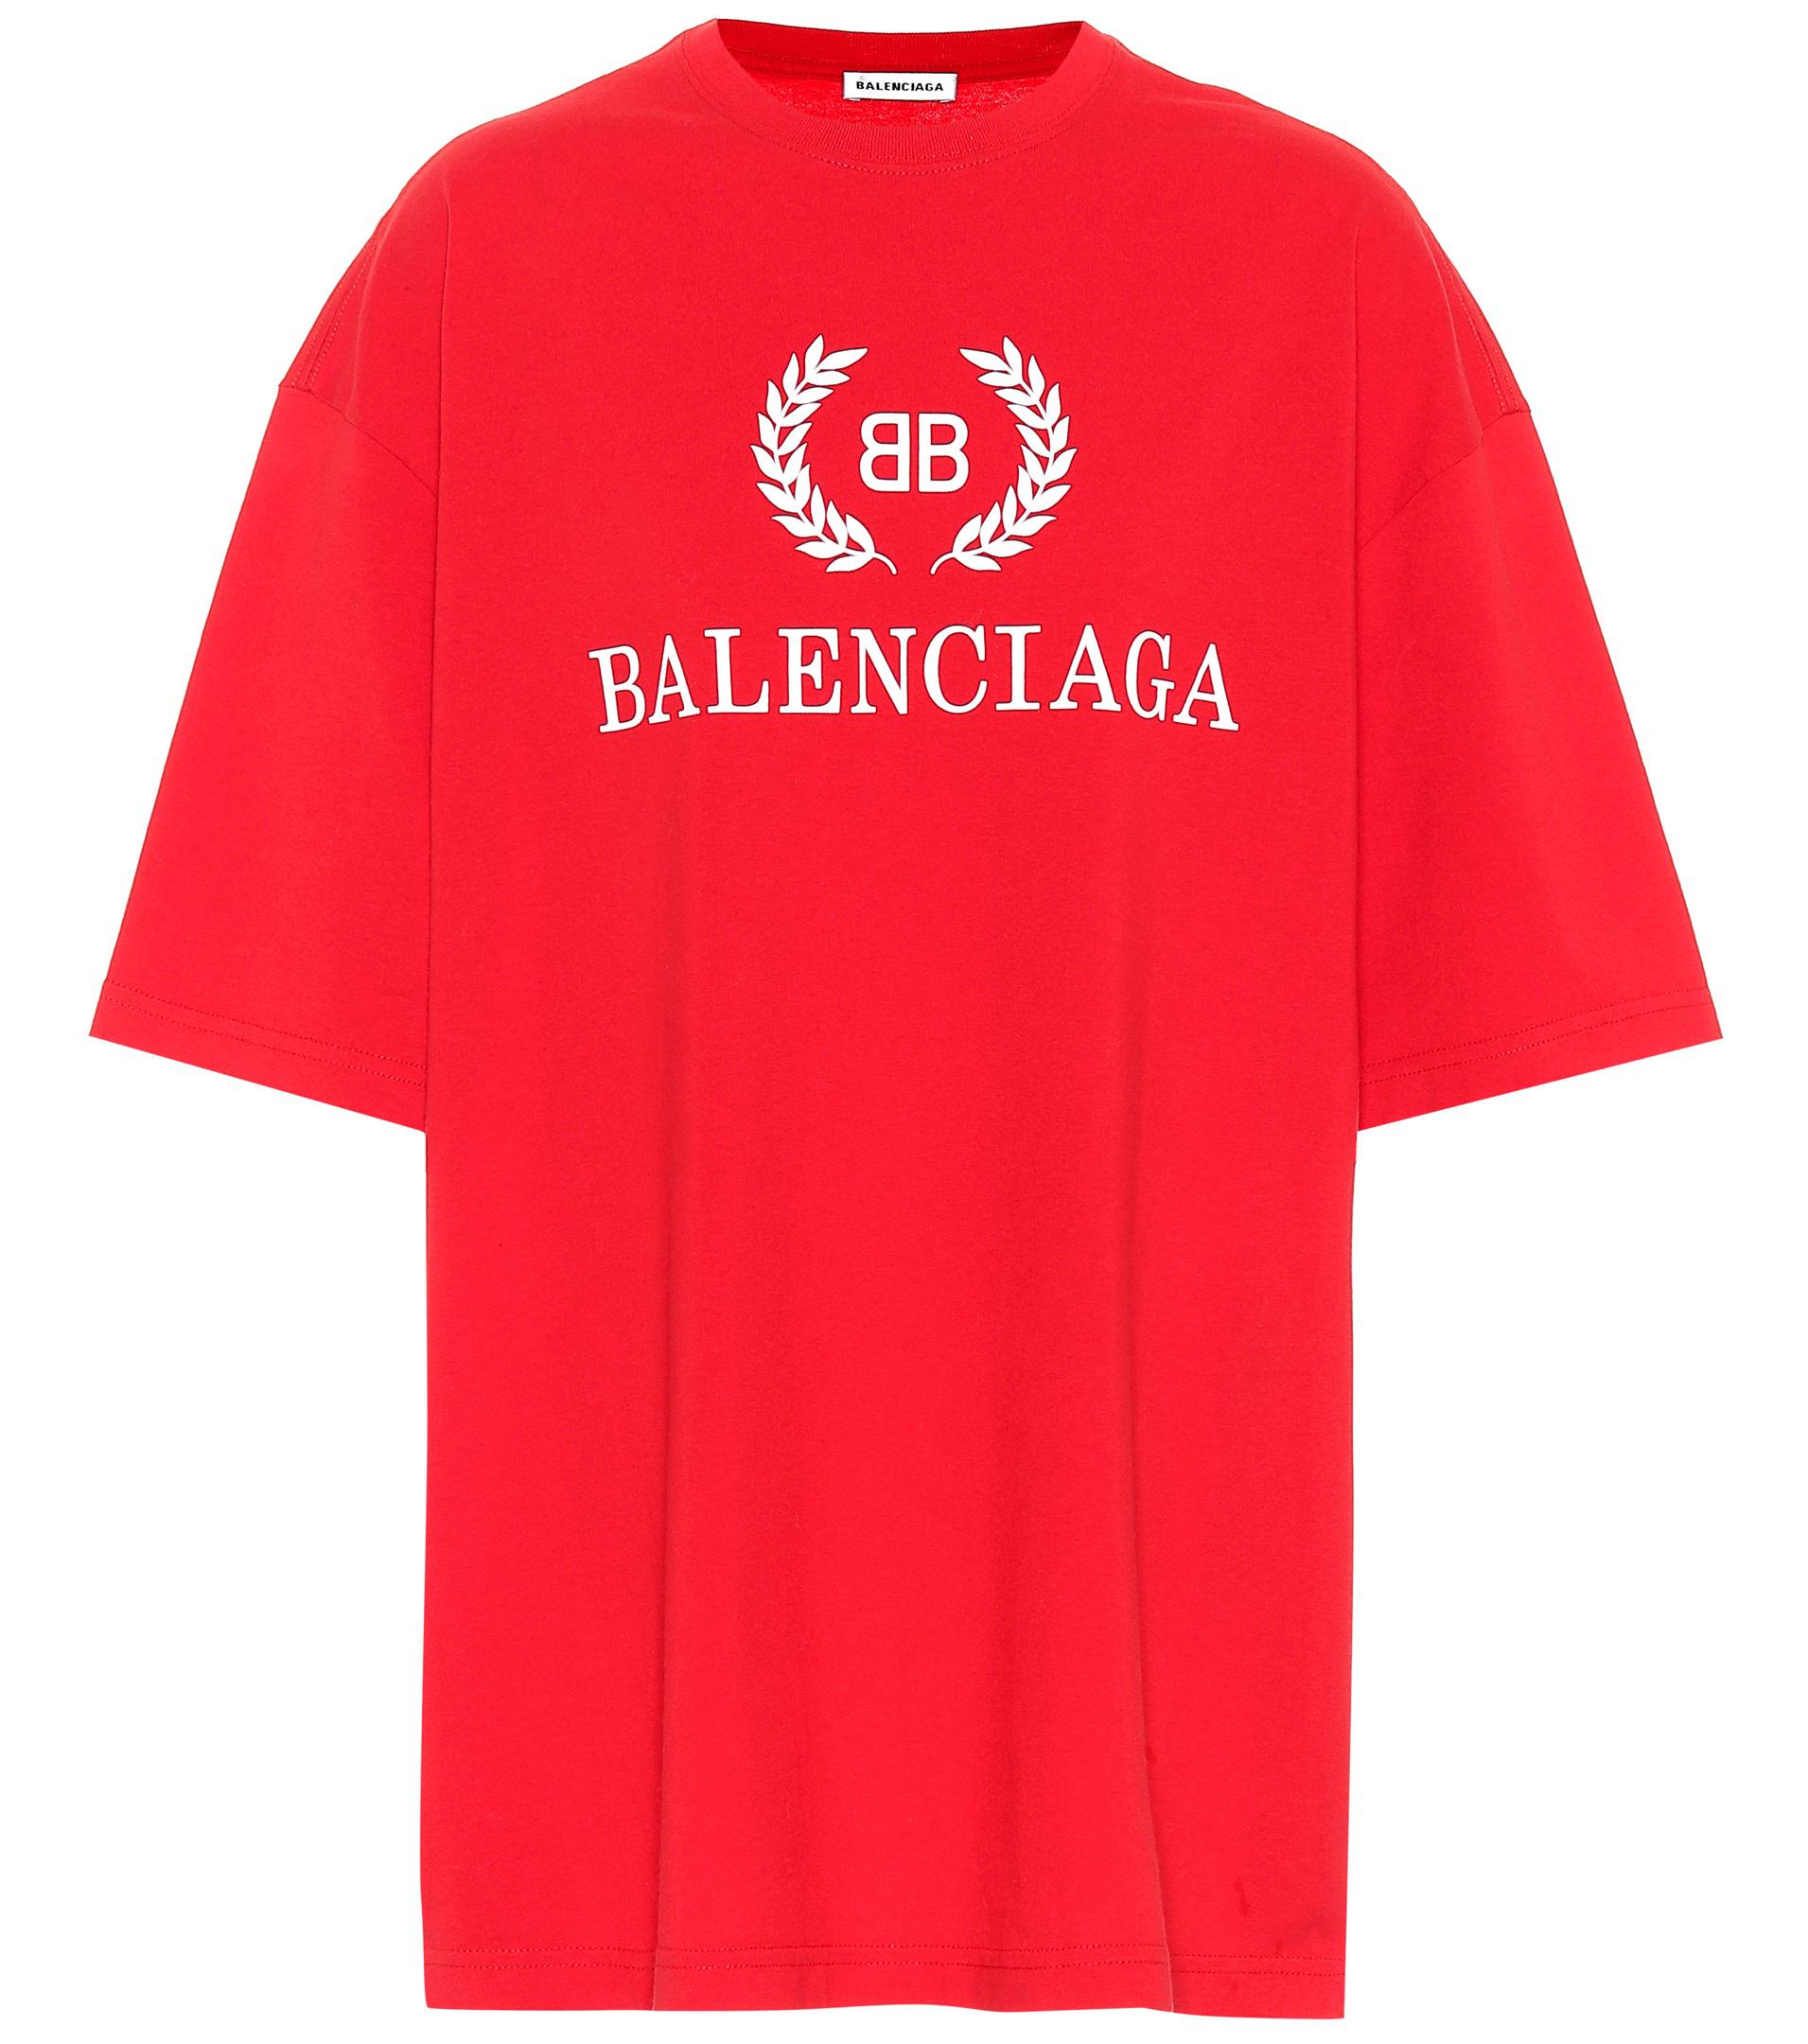 Lyst Balenciaga  Printed Cotton T  shirt  in Red Save 21 